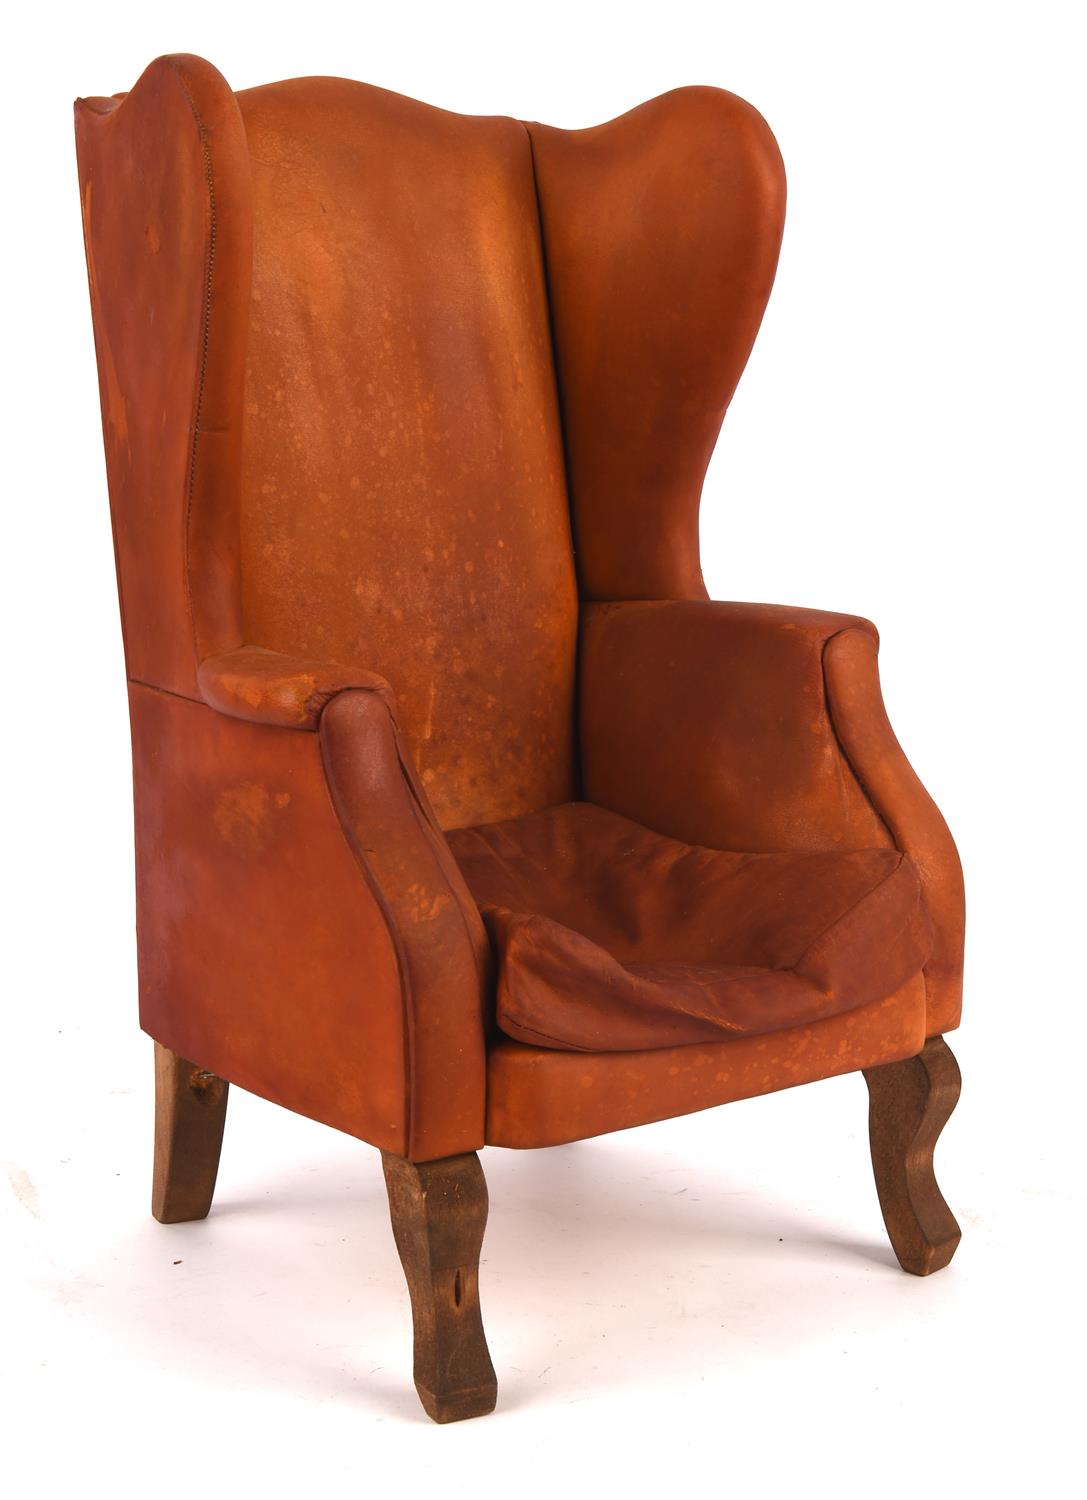 Gerry Anderson: The Secret Service (1969) - Original prop, tan leather wing-backed chair with - Image 2 of 3